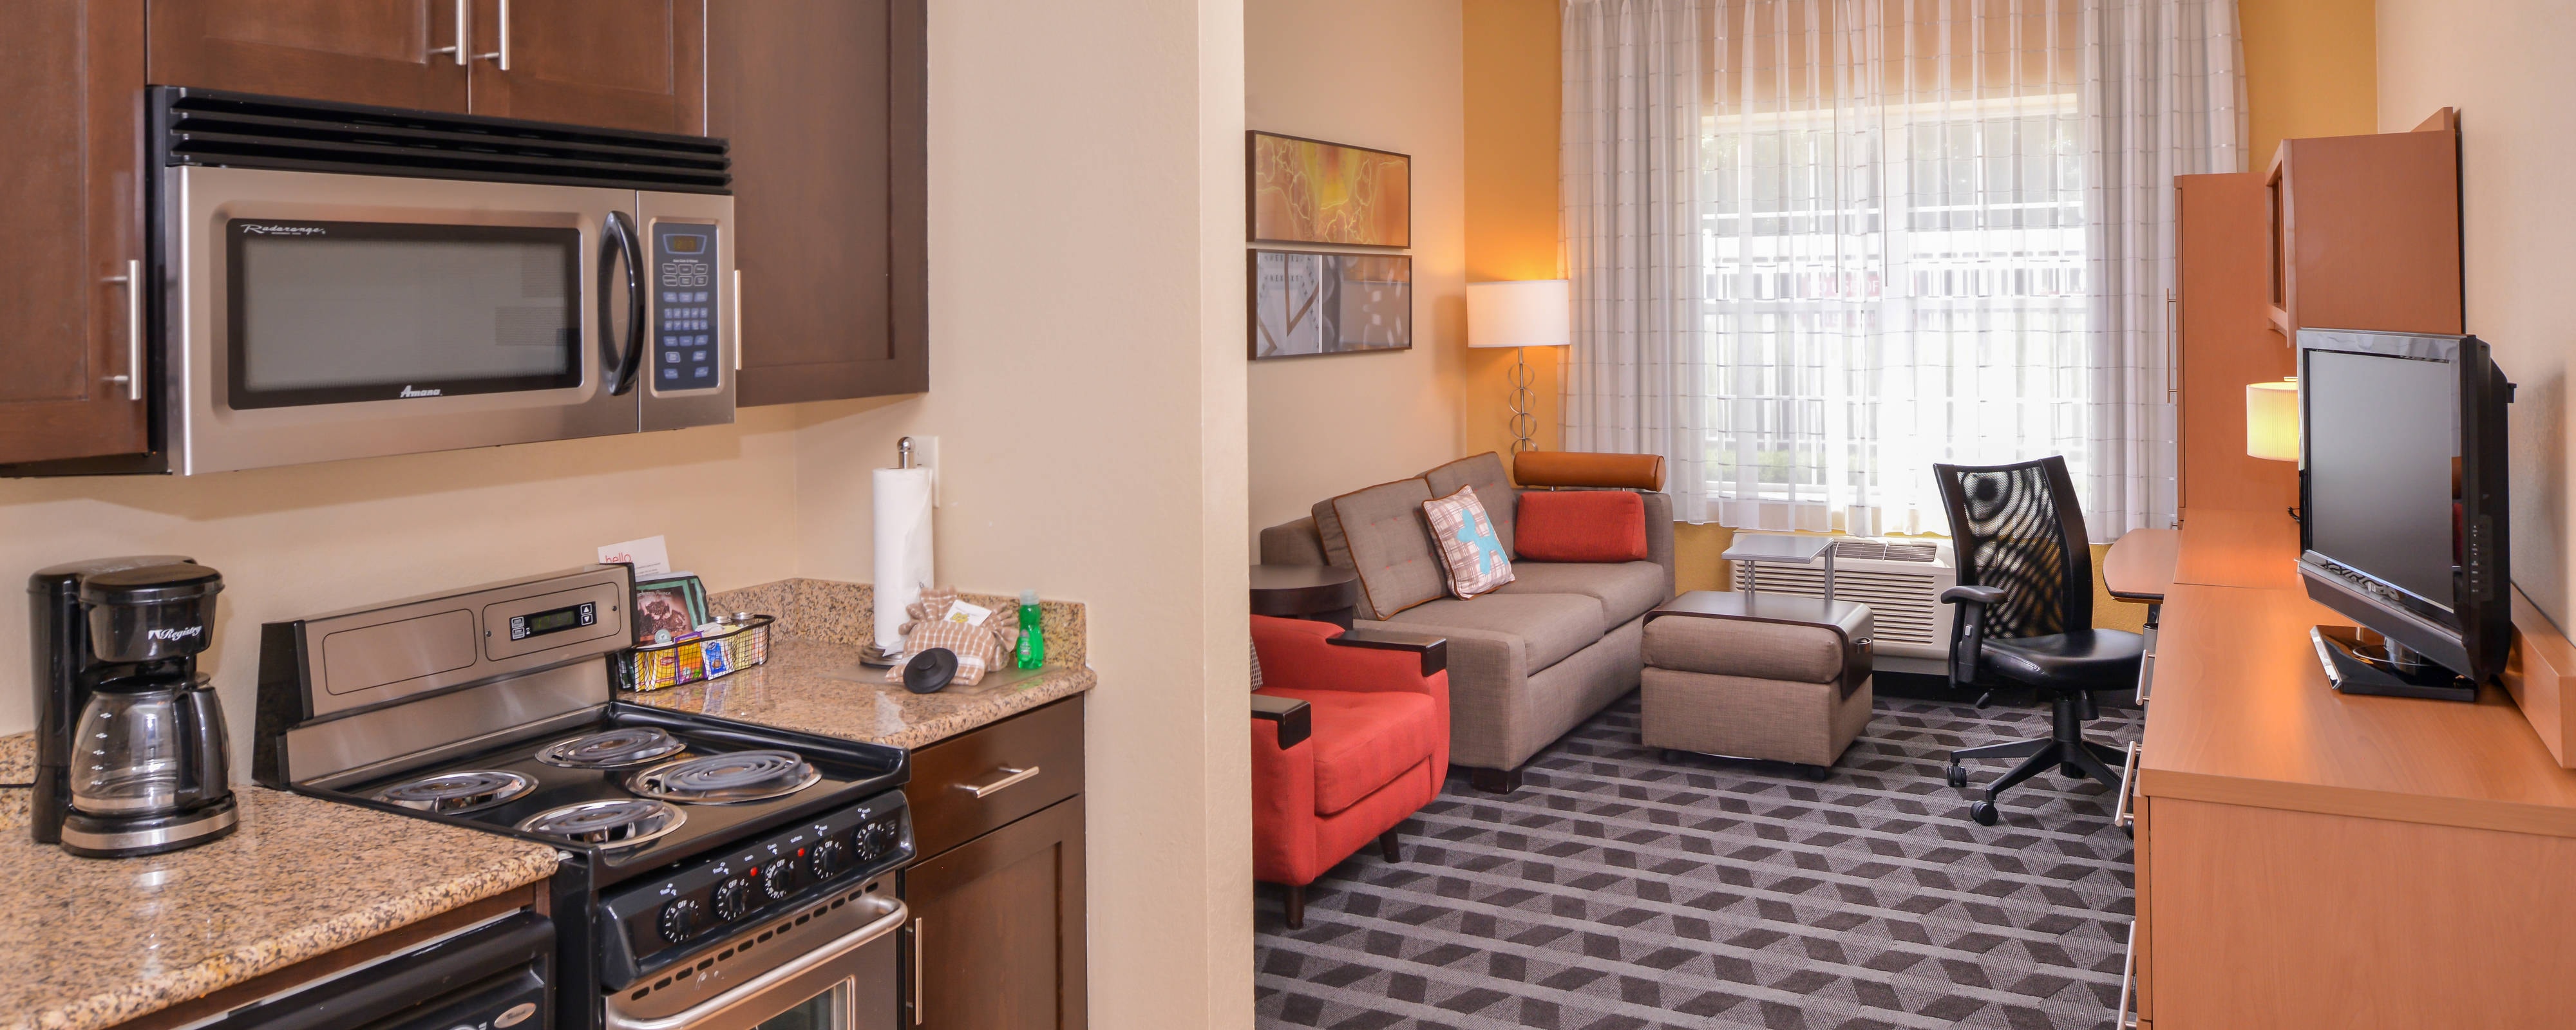 Towneplace Suites Arundel Mills Bwi Airport Hotel Nahe Dem